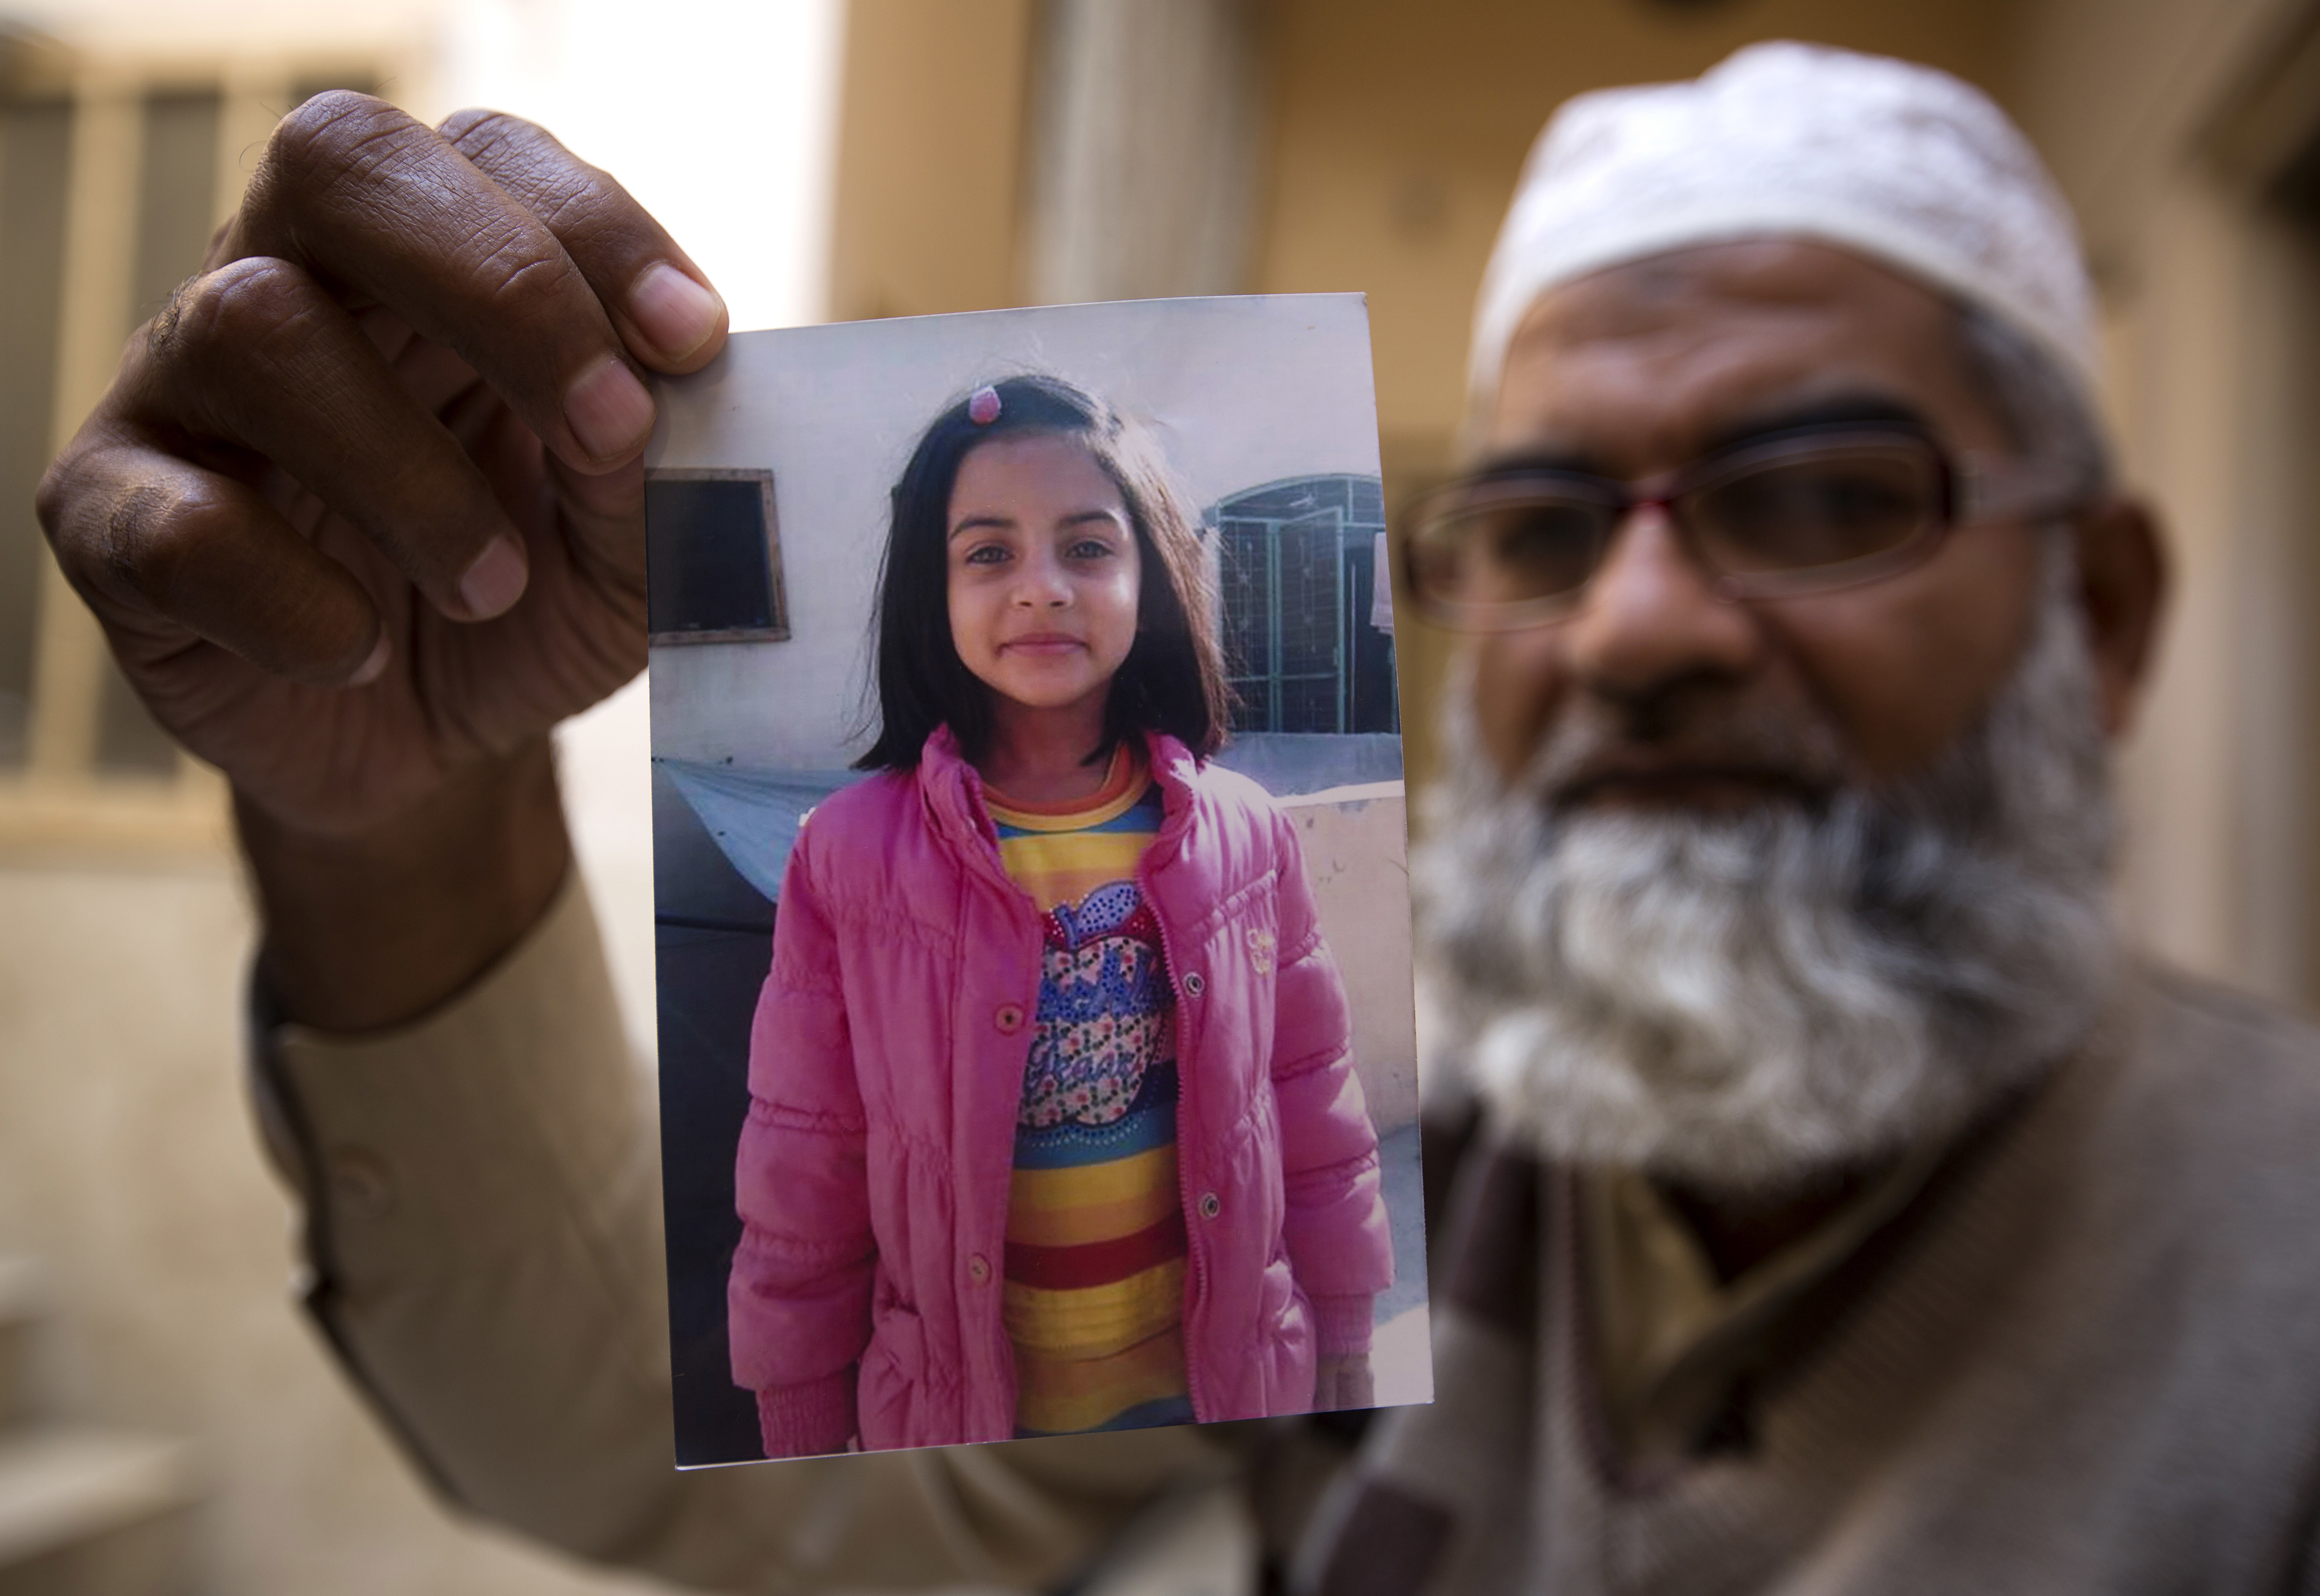 After girl's killing, Pakistani women speak out on abuse